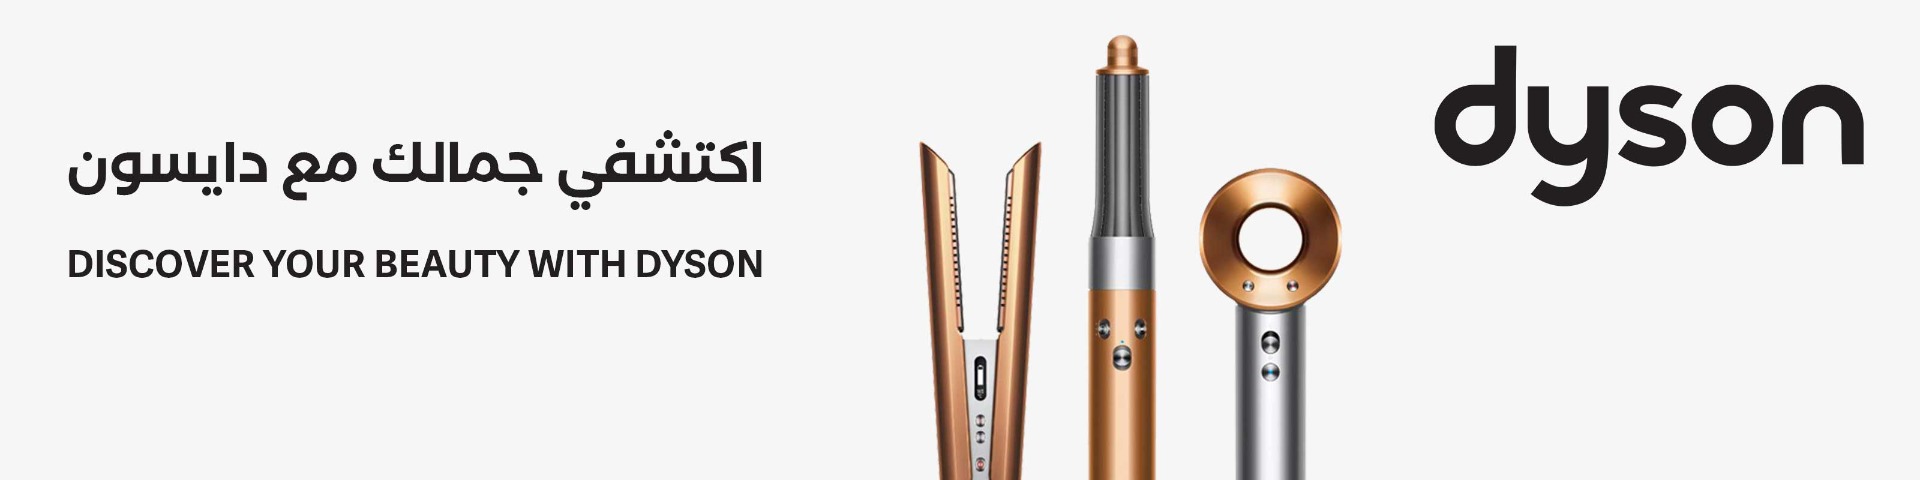 discover your beauty with dyson